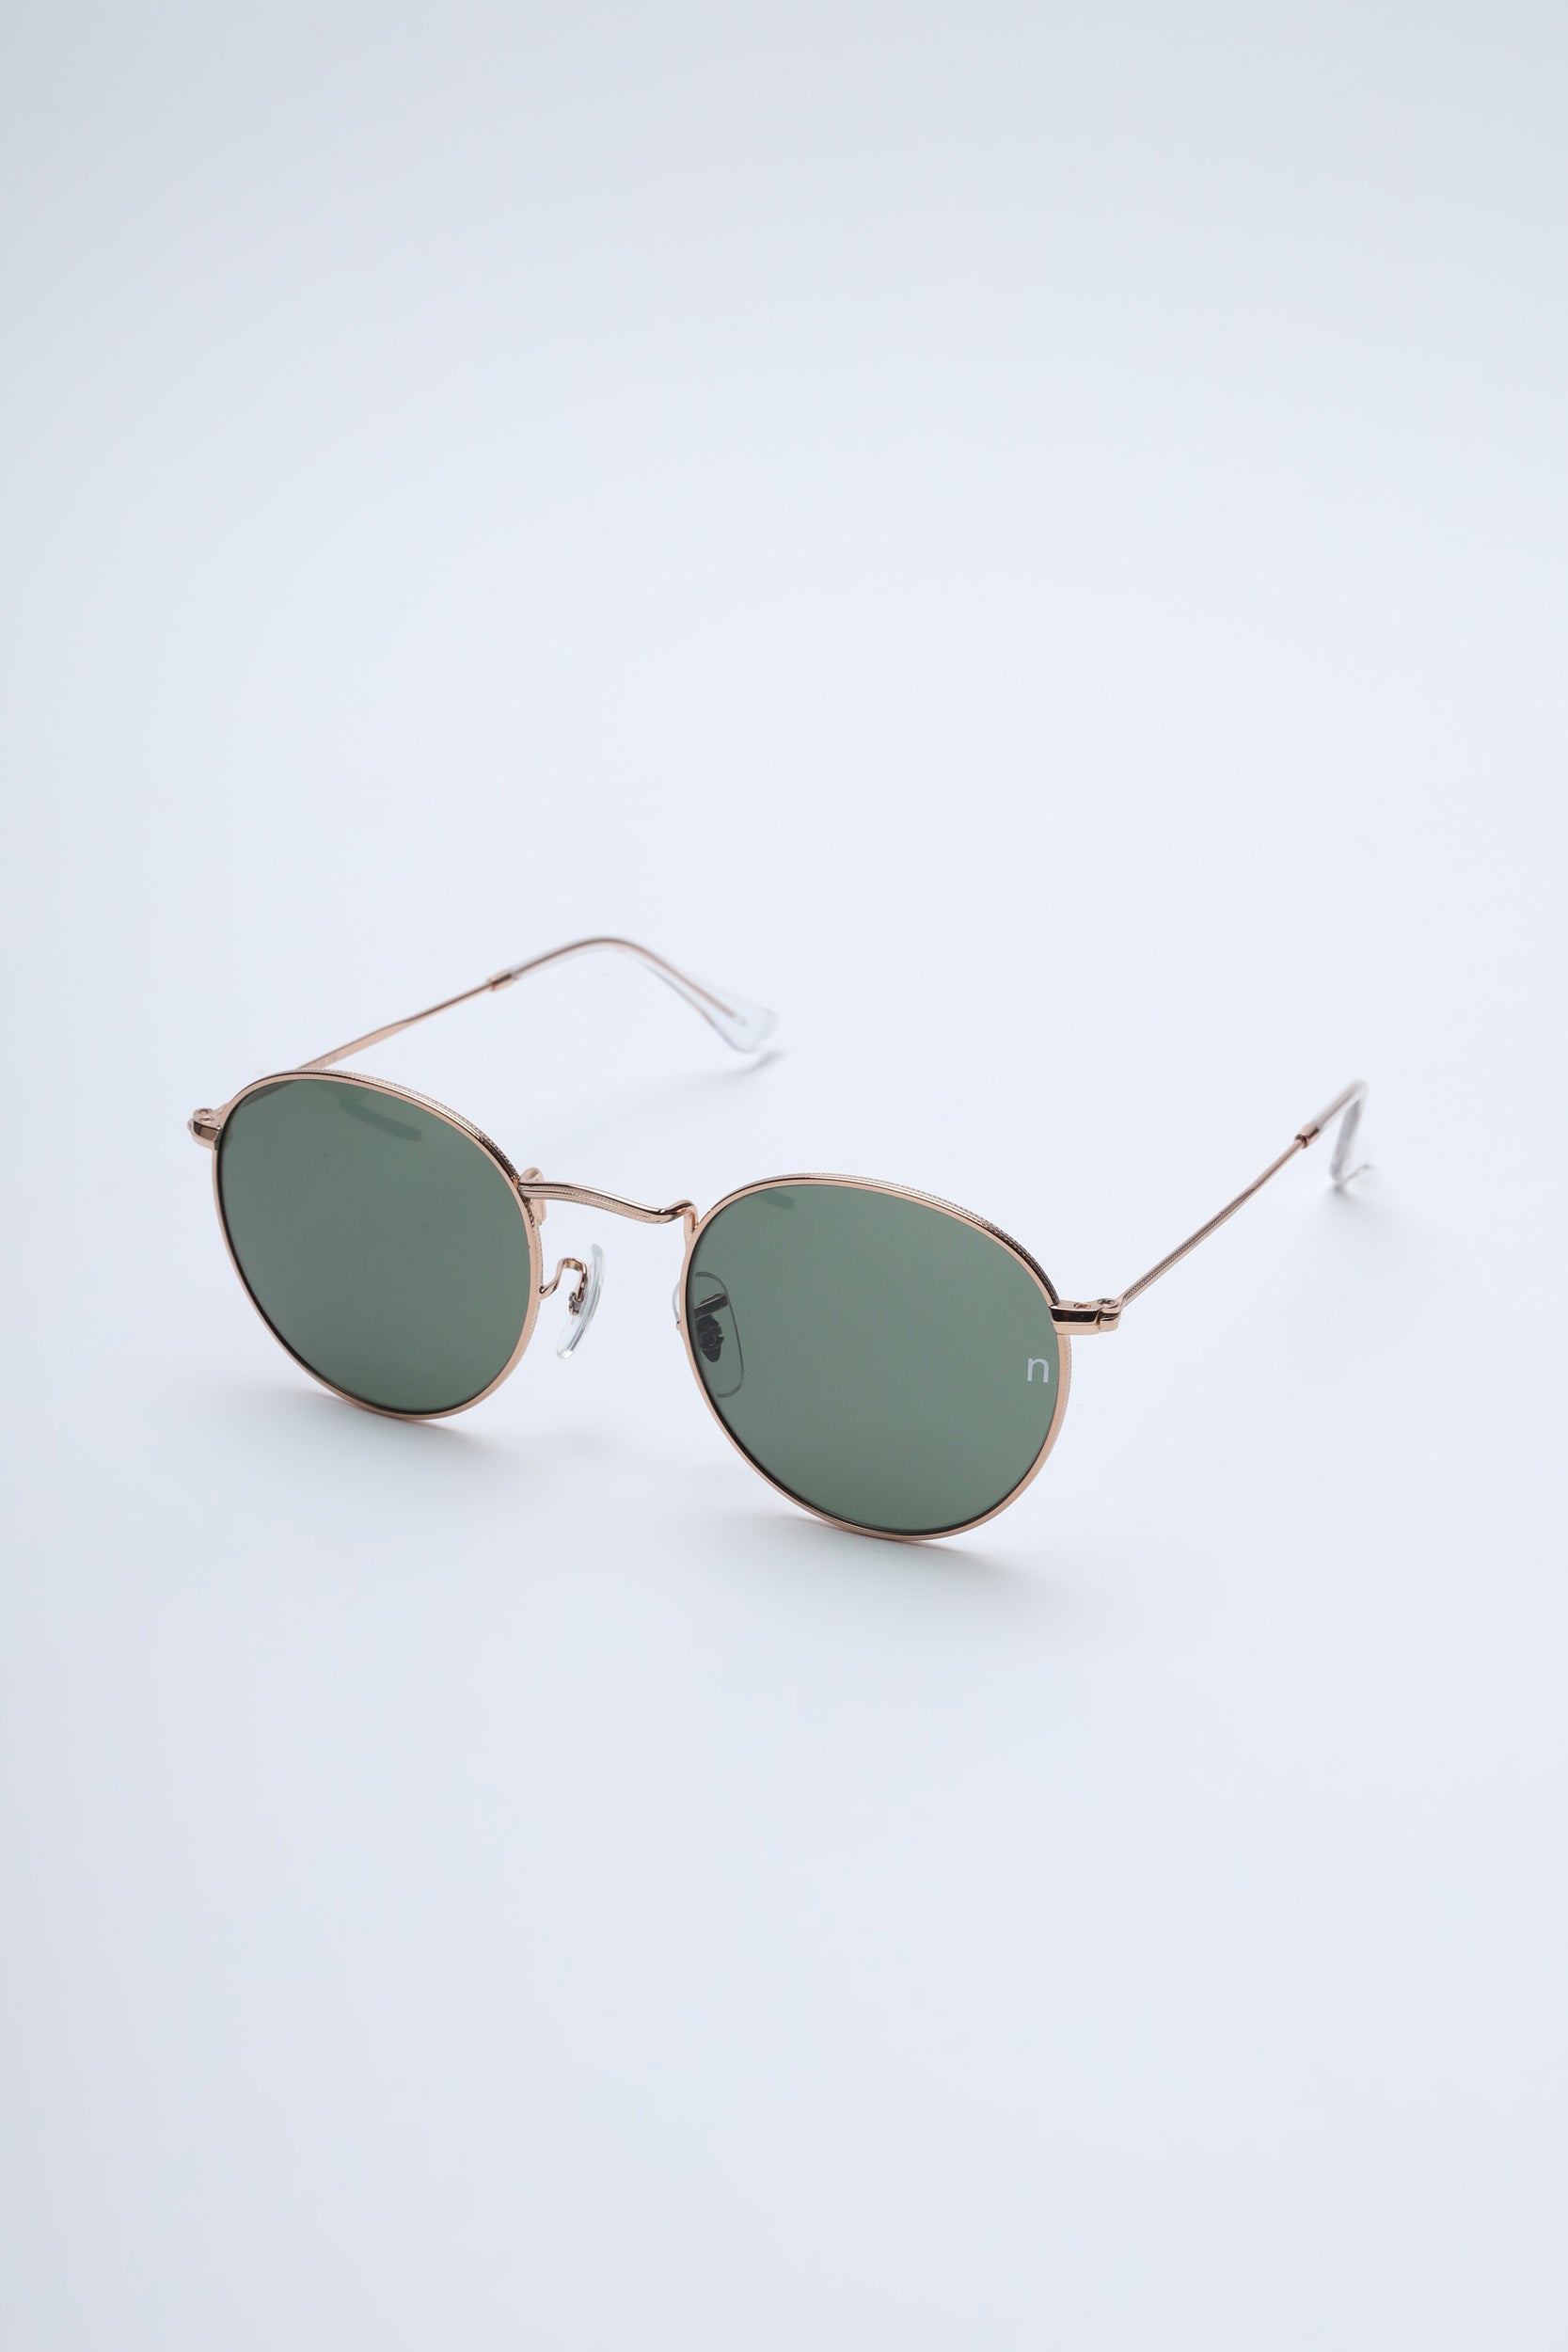 NS2004GFGL Stainless Steel Gold Frame with Green Glass Lens Sunglasses